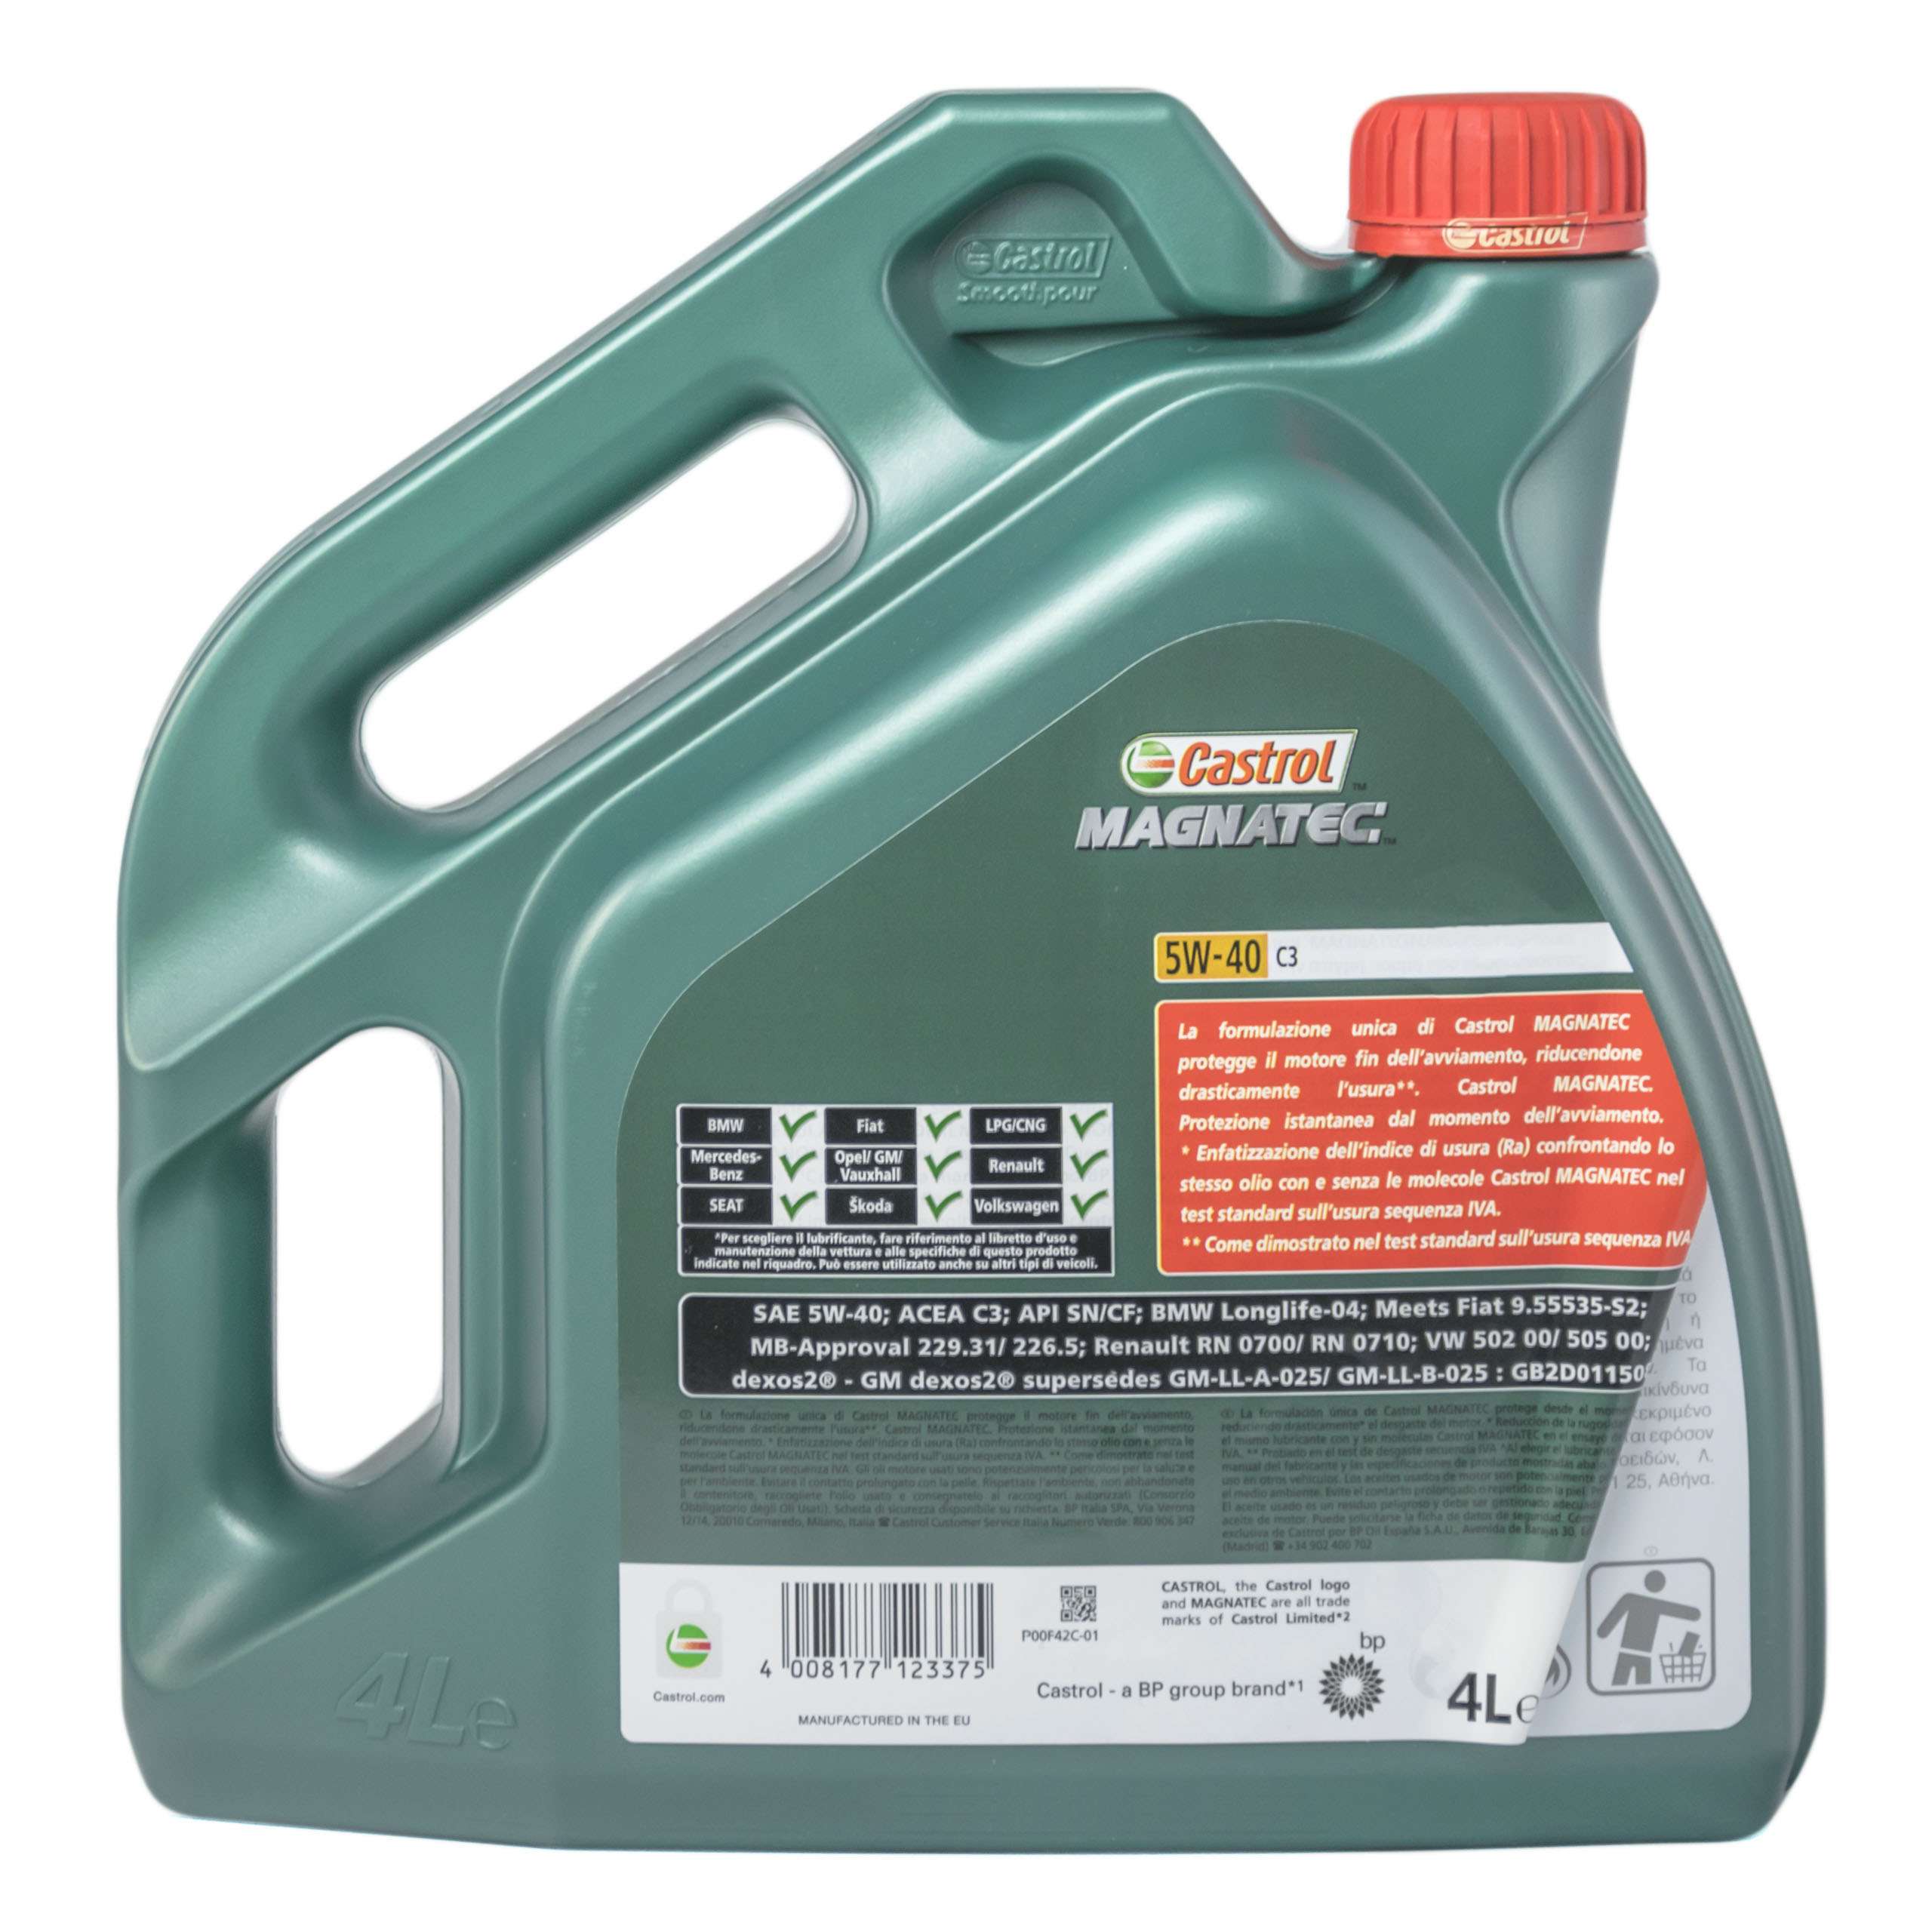 MILLERS OILS TRIDENT LONGLIFE 5W30 20L